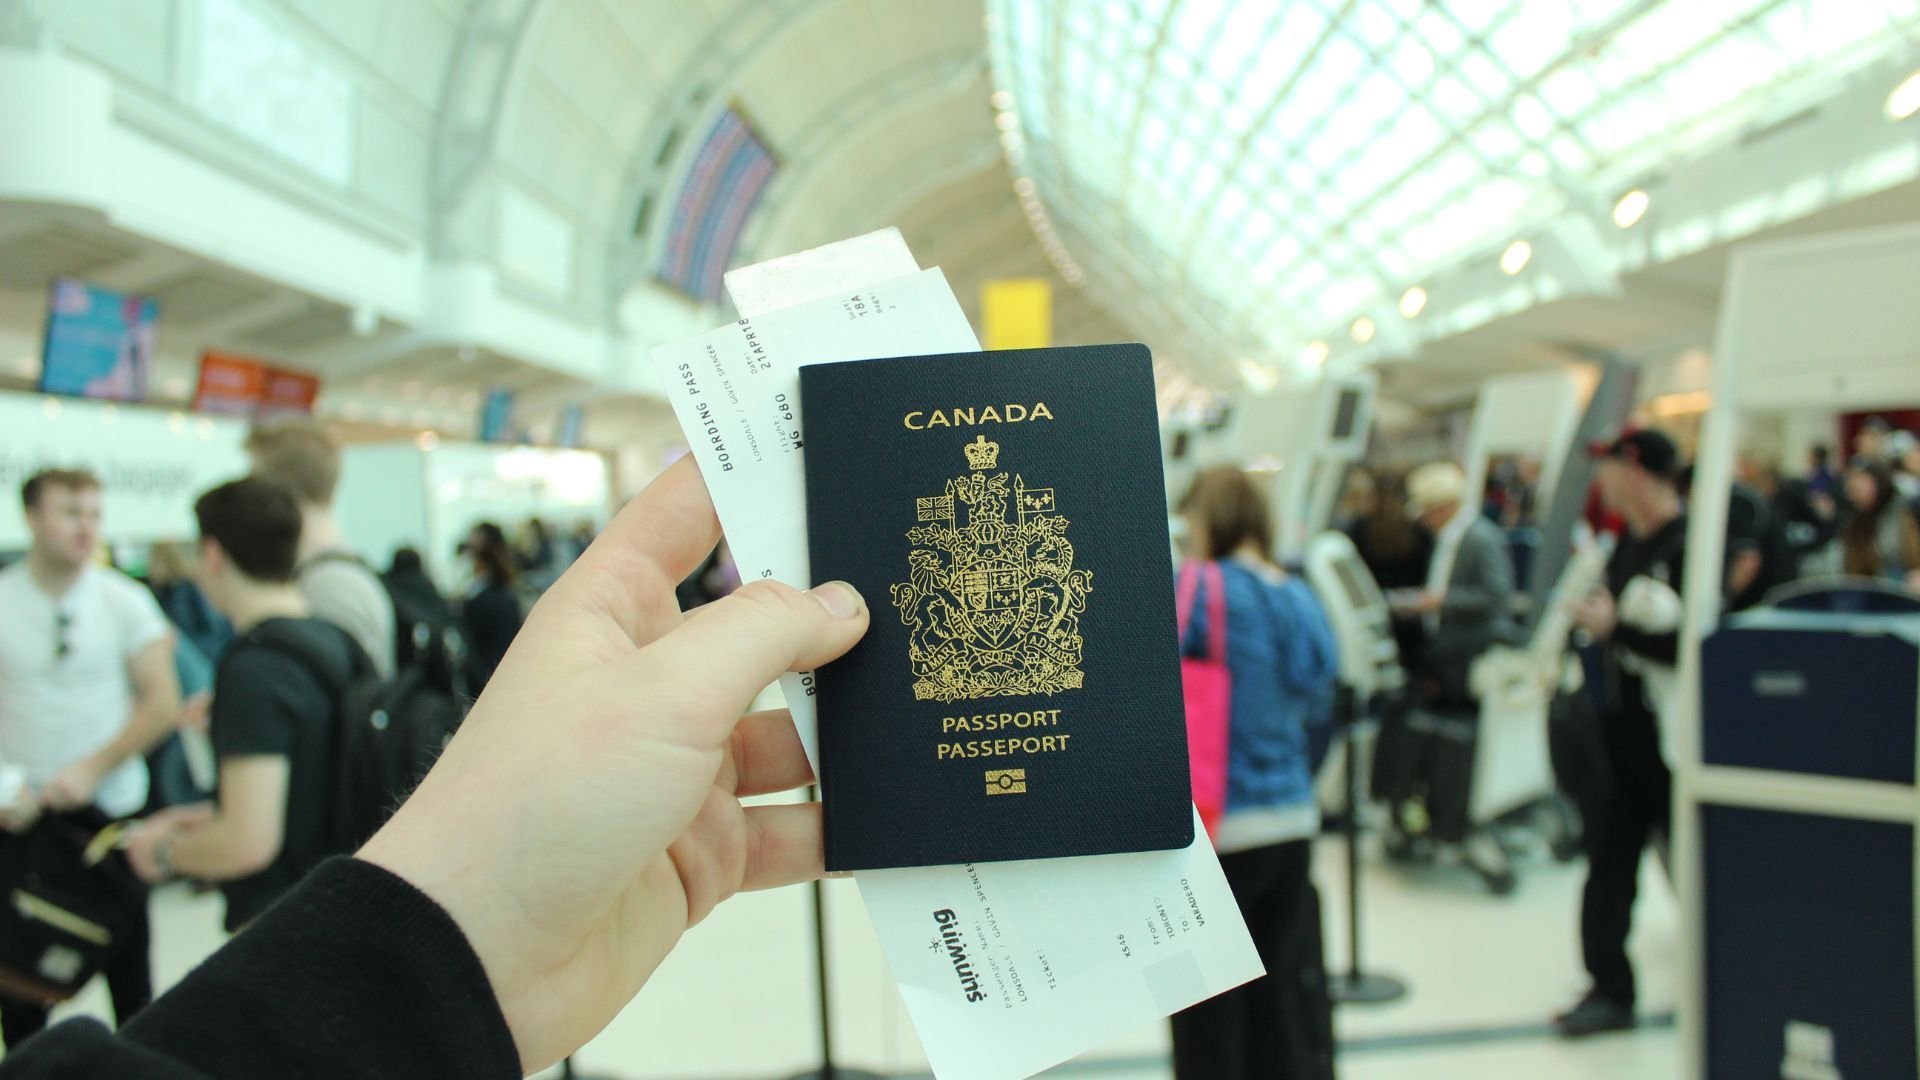 India-Canada news: How the visa office suspension affects travellers